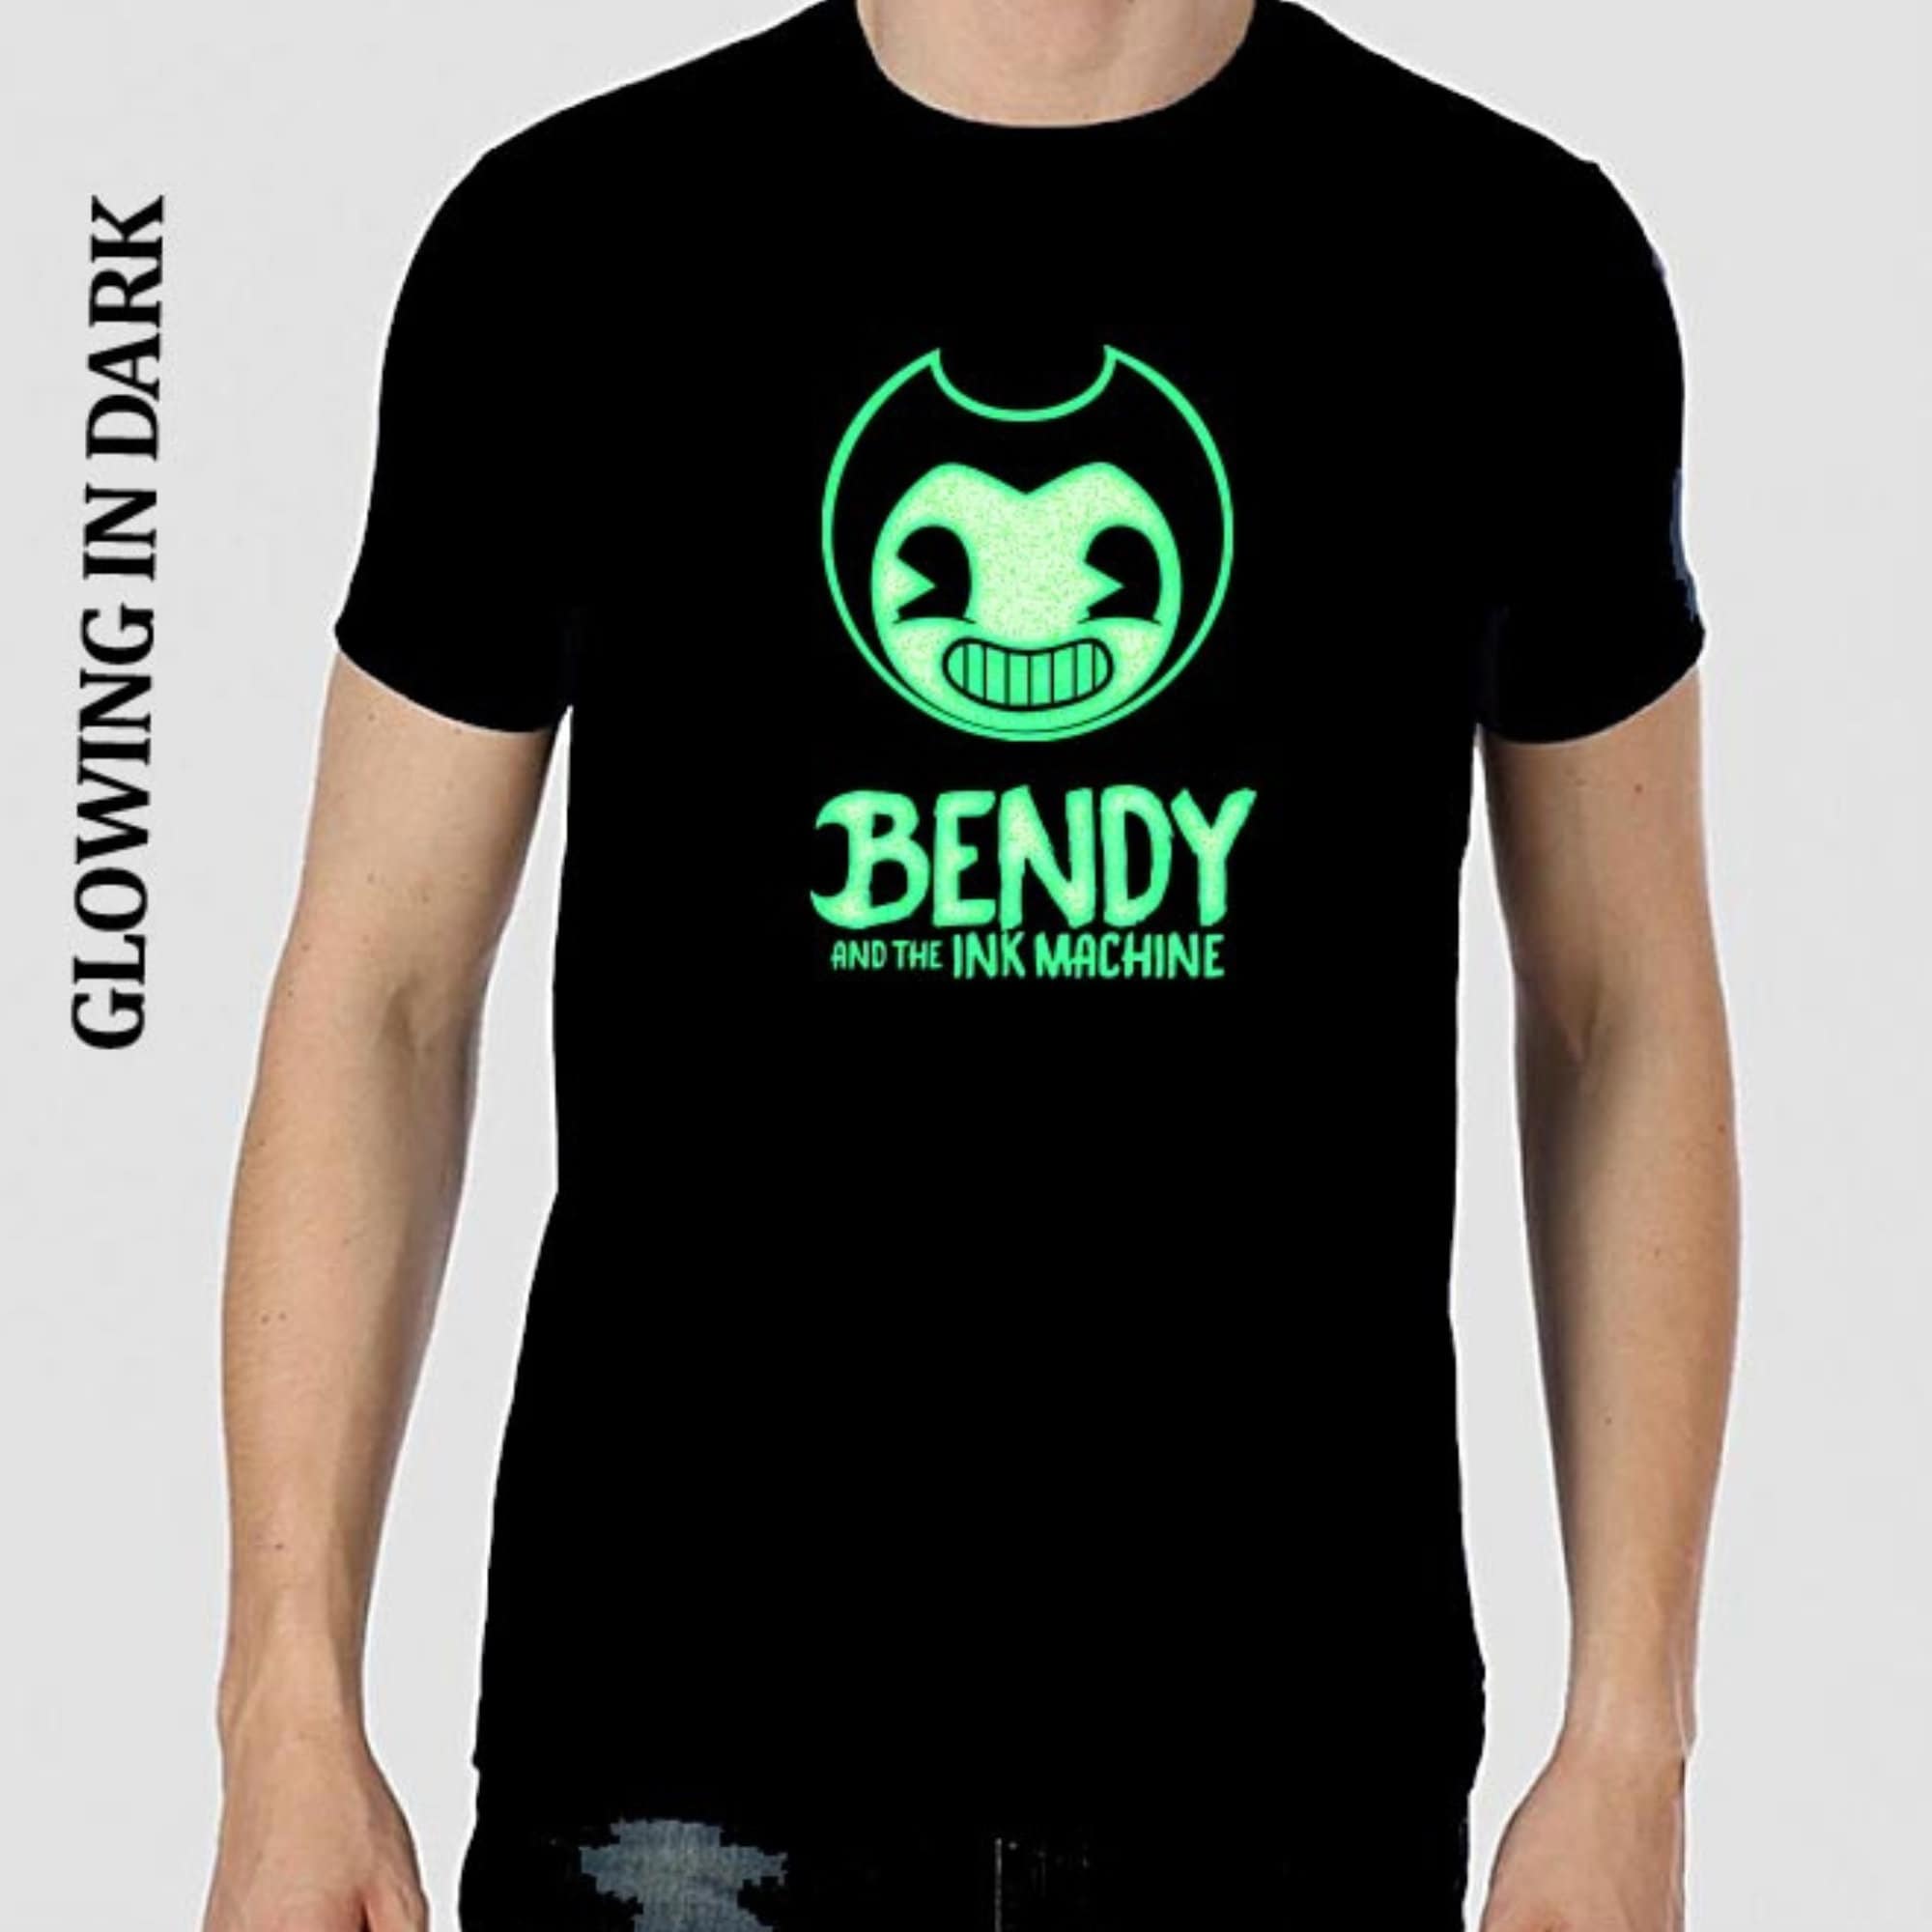 Bendy and the Ink Machine logo inspired Digital download, Bendy and the Ink  Machine svg, Bendy and the Ink Machine vecto